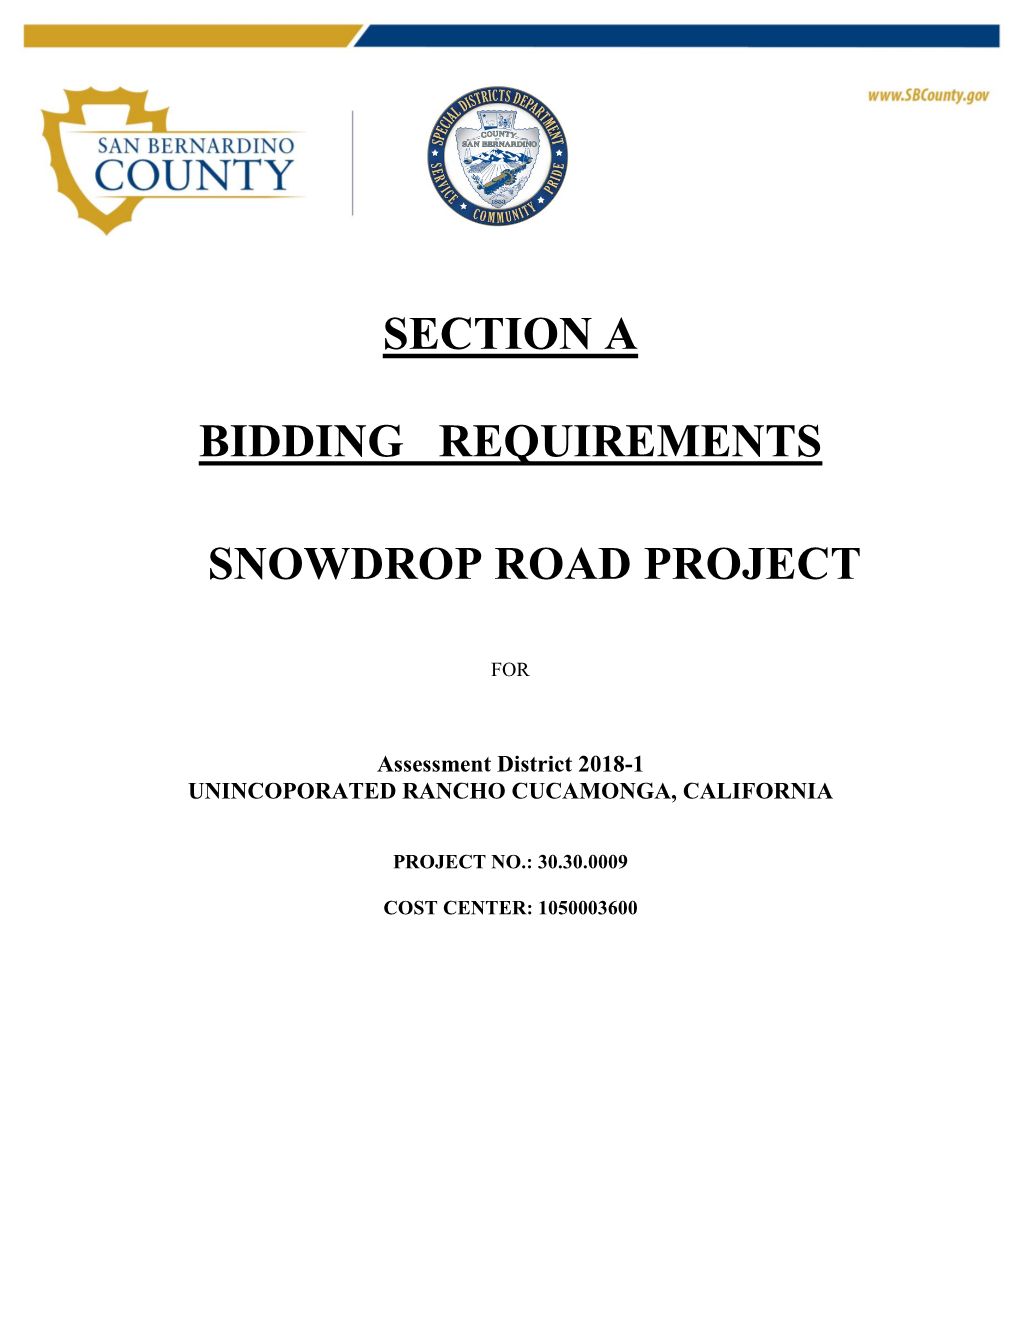 Section a Bidding Requirements Snowdrop